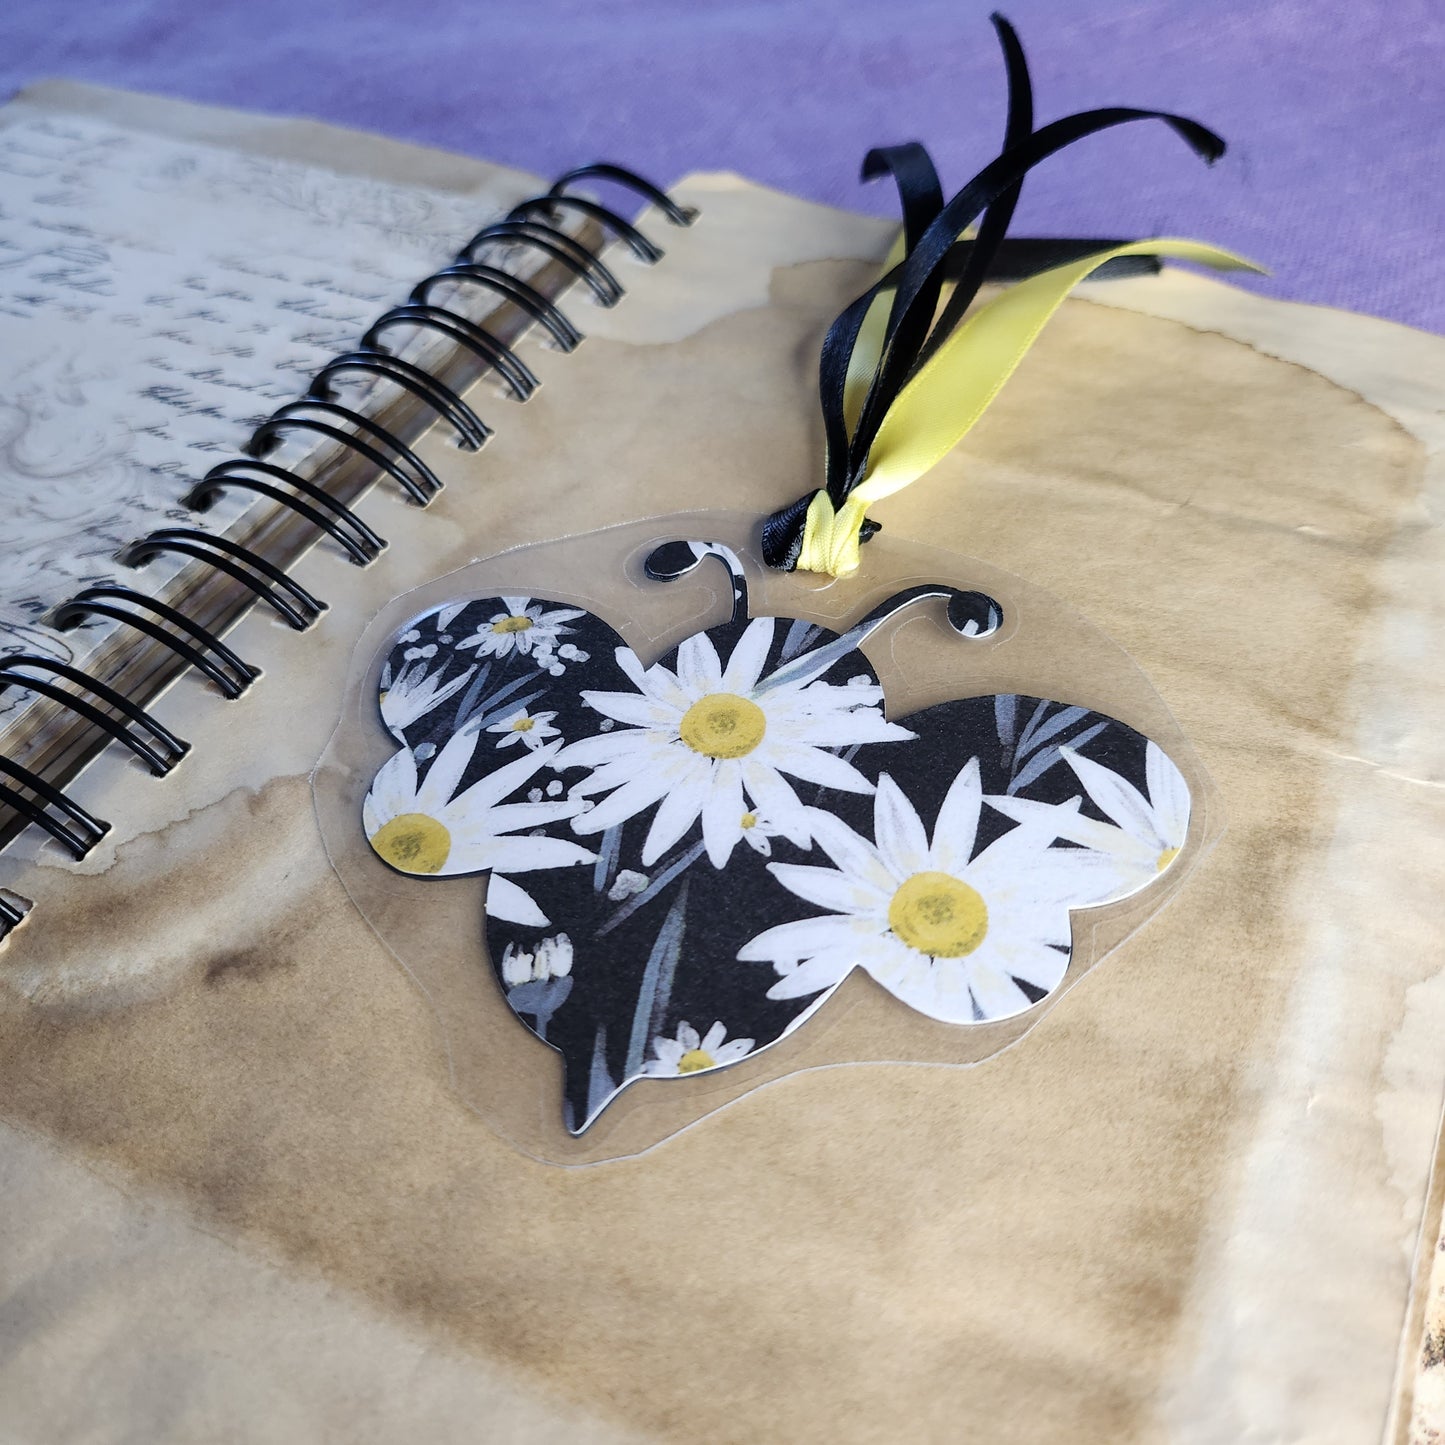 Healing Takes Time Bookmark, Mental Health Bookmark, Daisy Bumble Bee Bookmark,